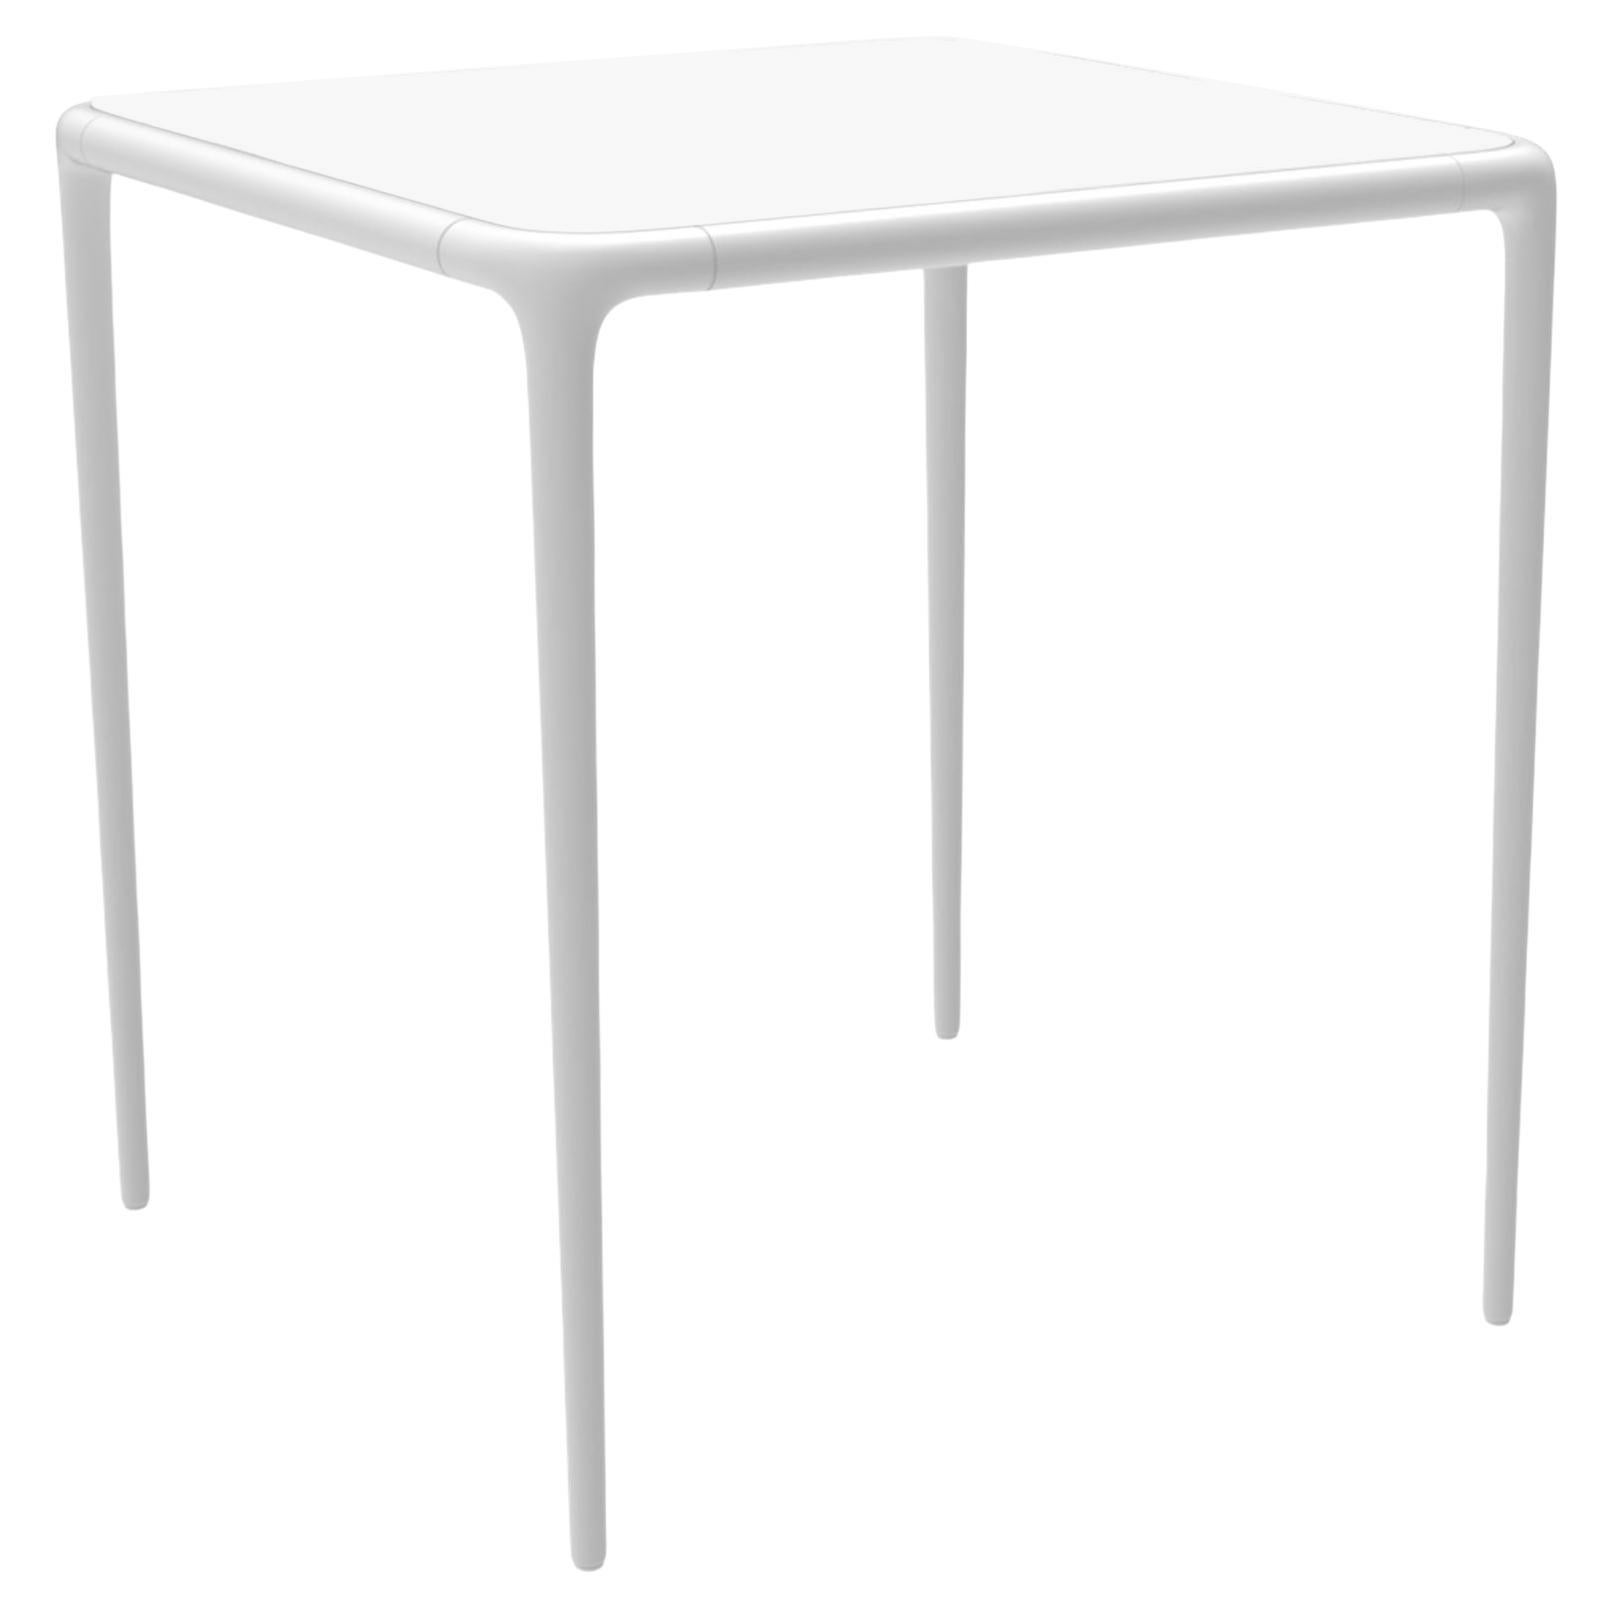 Xaloc White Top Glass Table 70 by Mowee For Sale